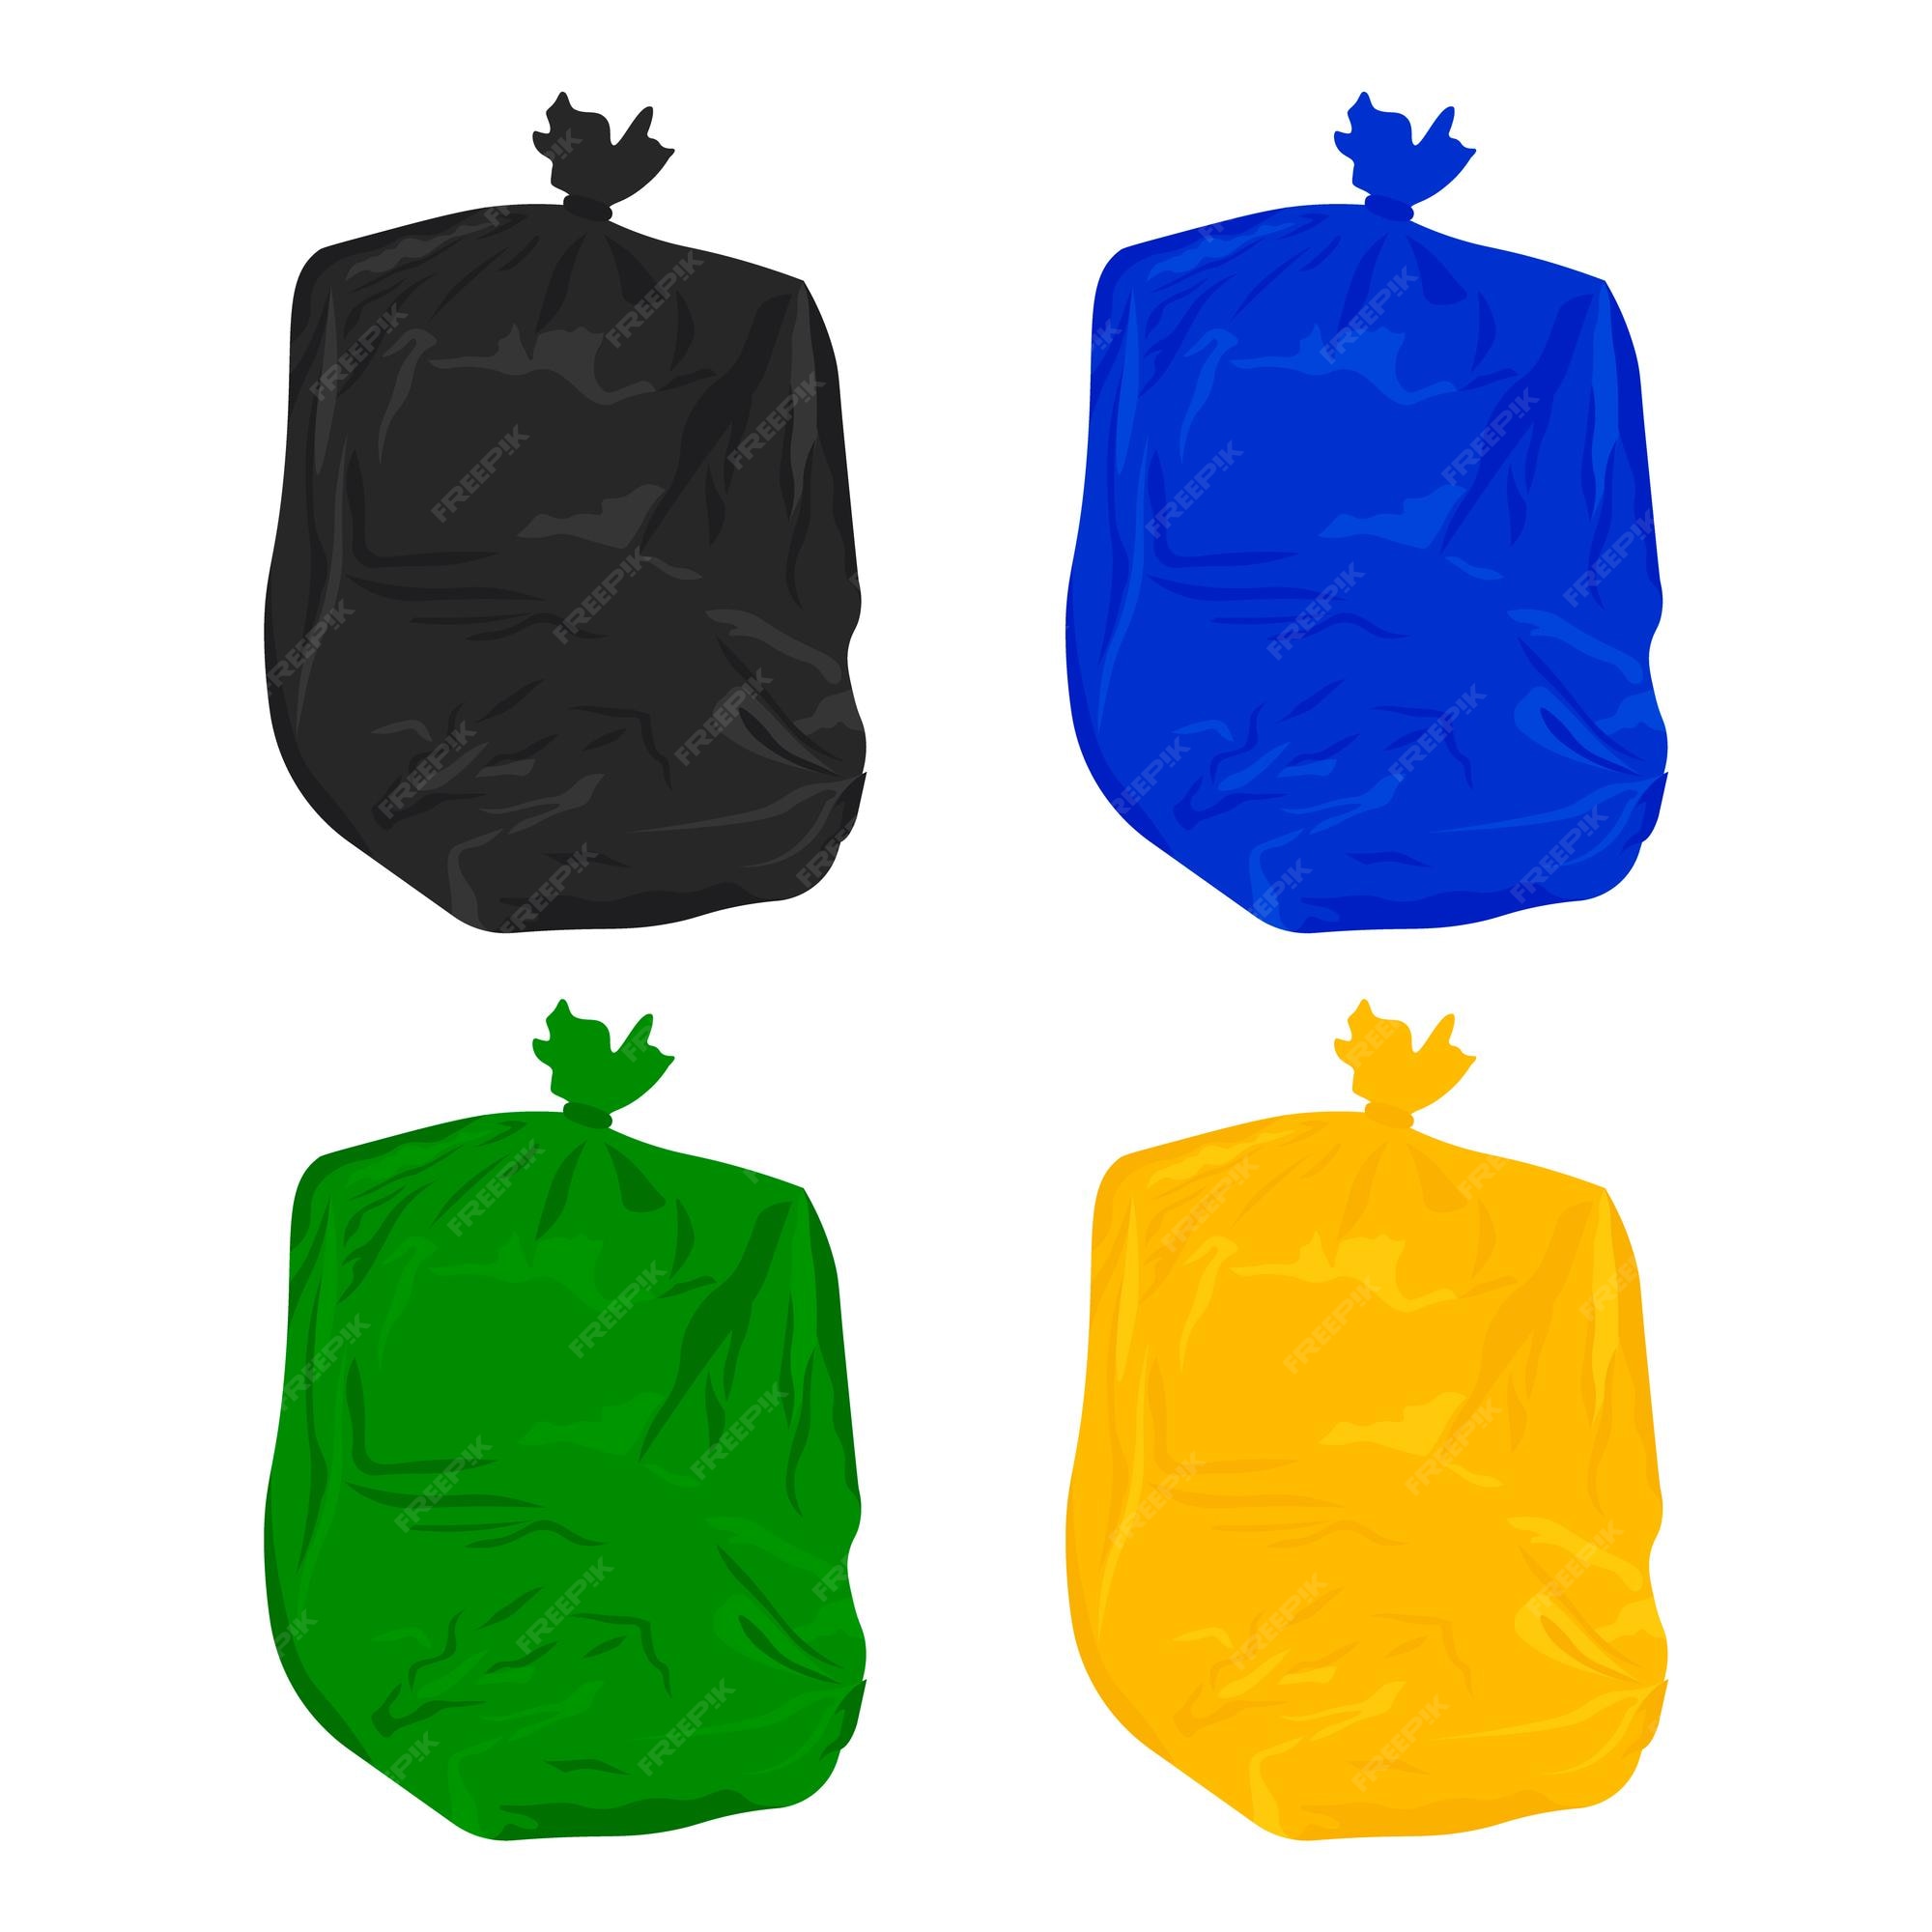 What's the Deal with Different Colored Garbage Bags?